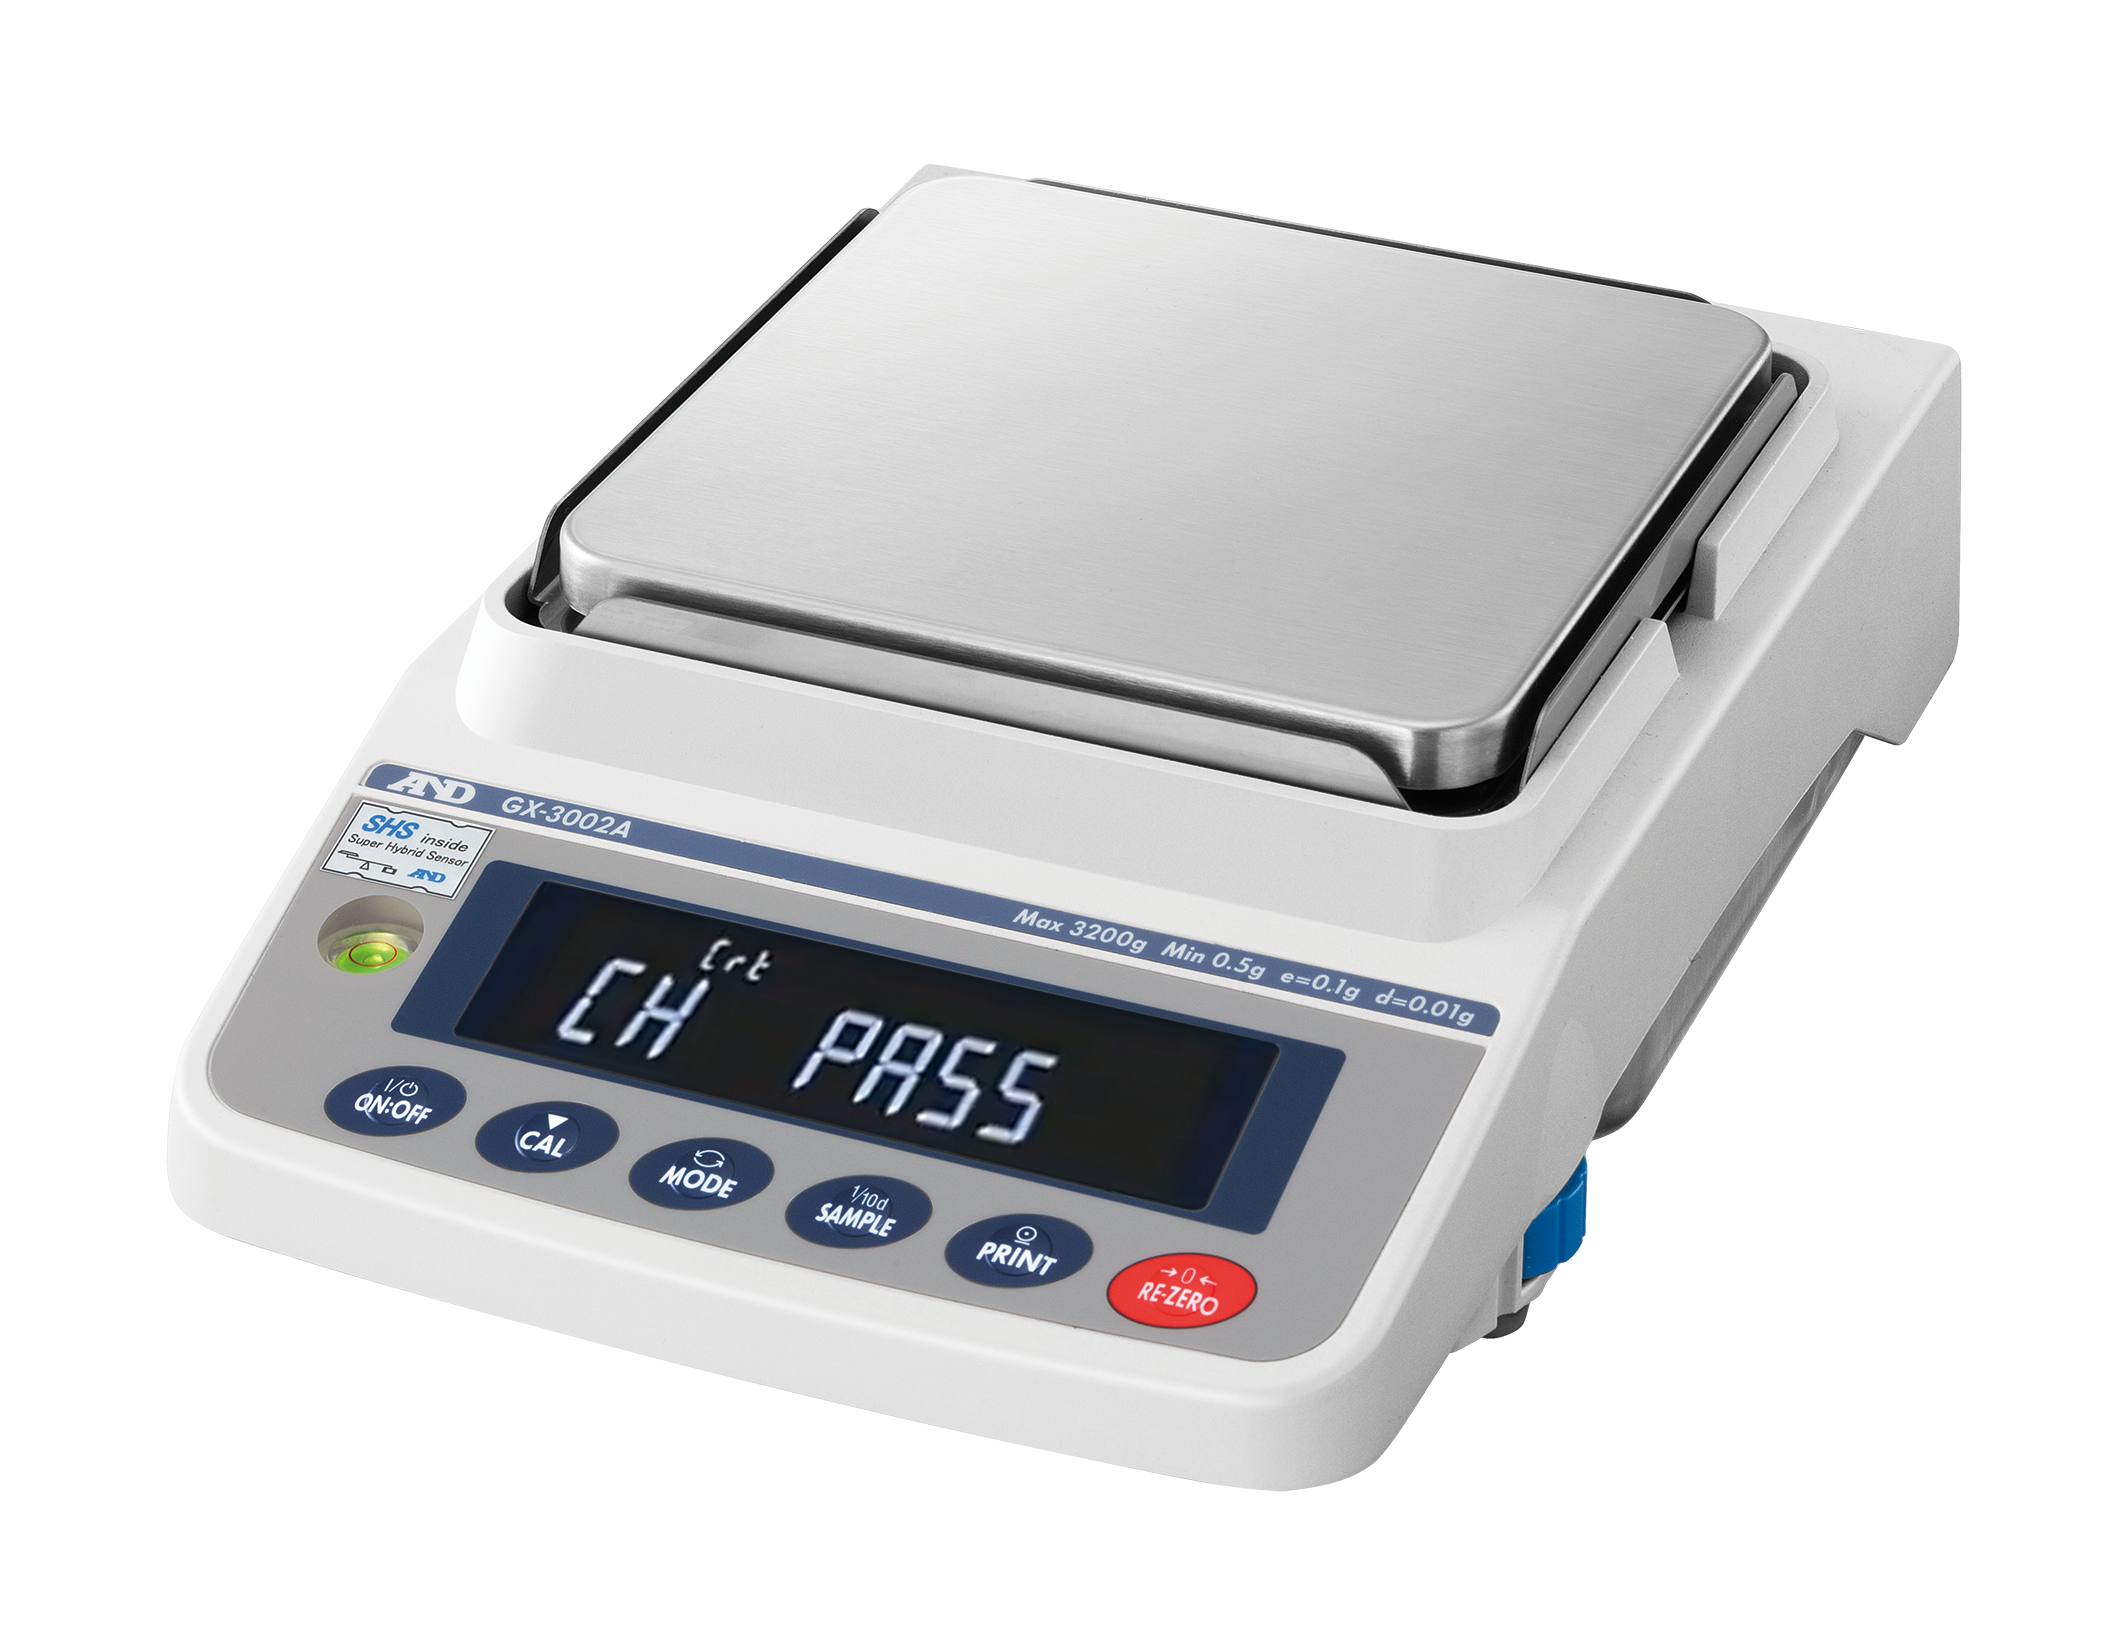 A&D Weighing Apollo GX-4002A Precision Balance, 4200g x 0.01g with Internal Calibration with Warranty